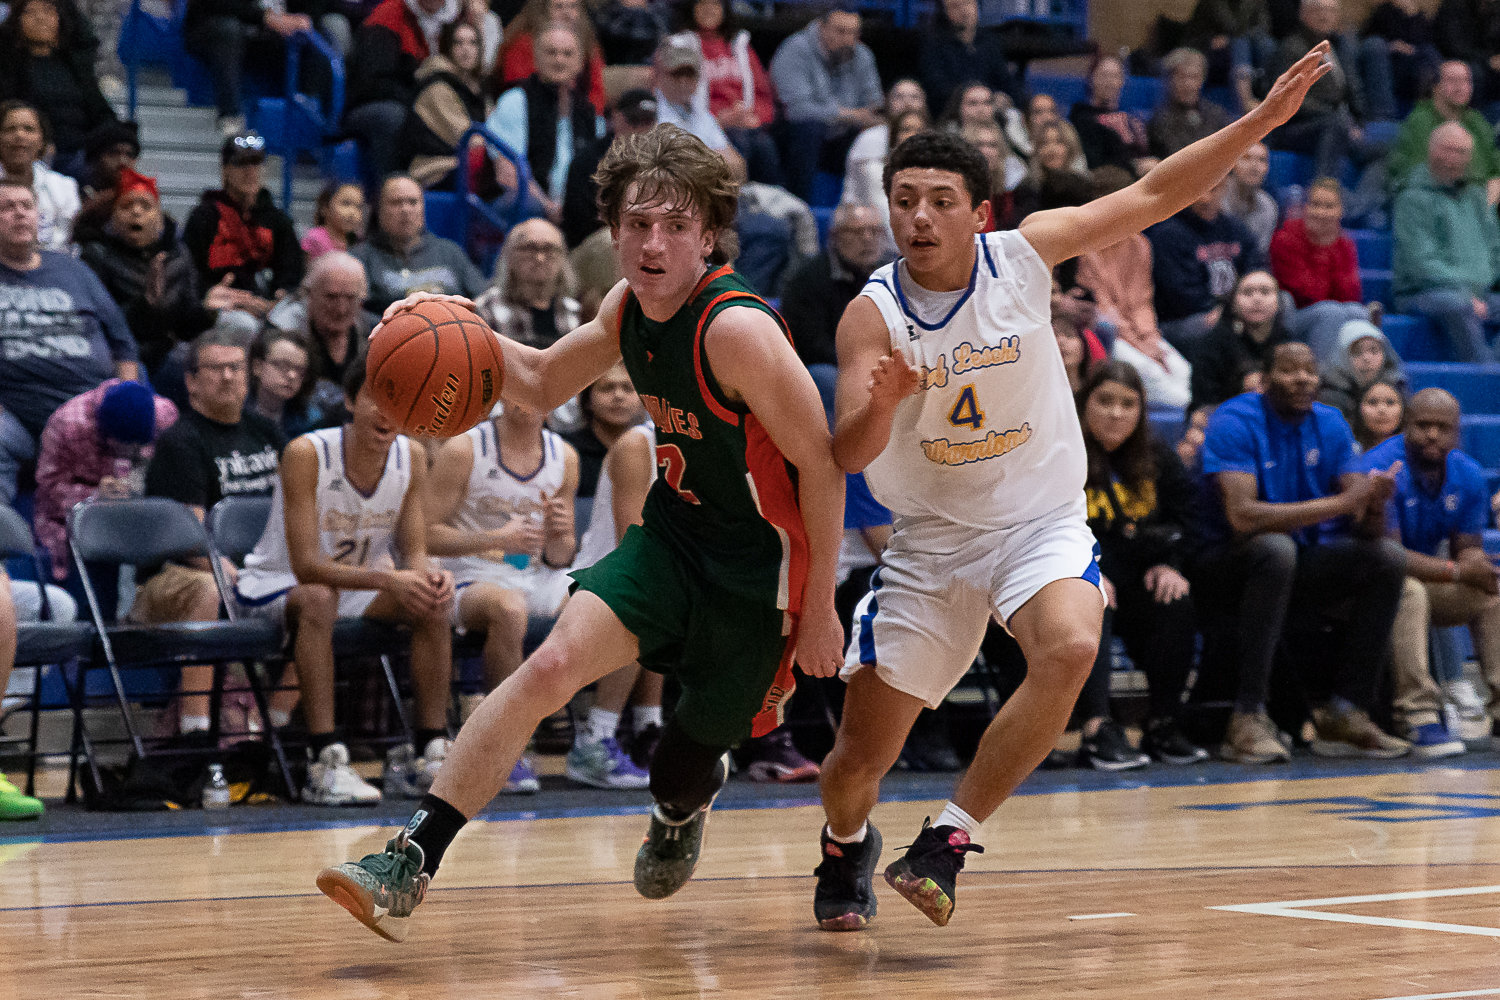 Morton-White Pass guard Judah Kelly sprints past a Chief Leschi defender in the 2B District 4 semifinals at Kelso Feb. 15.